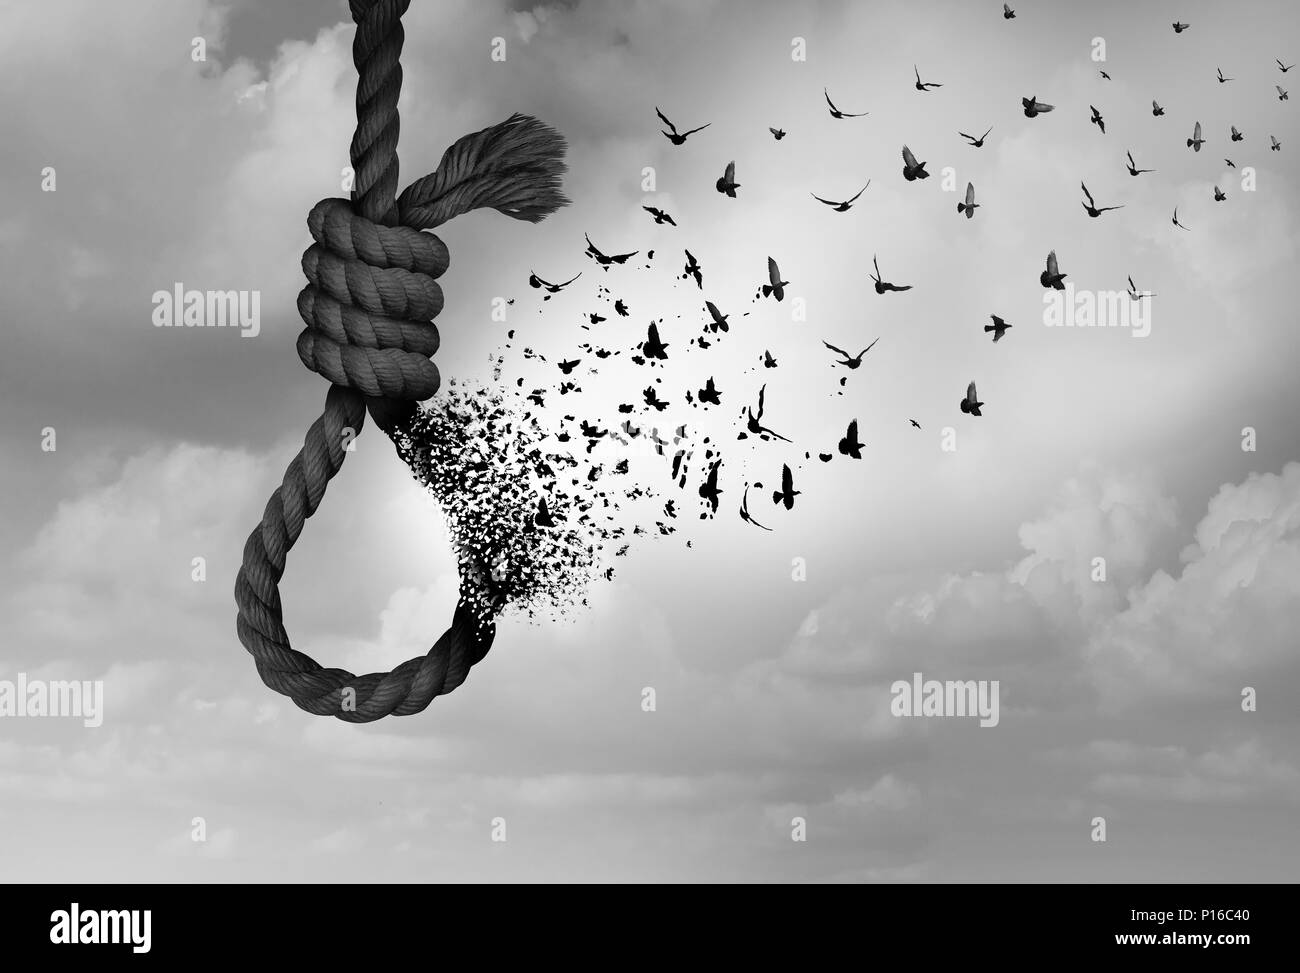 Psychology of suicide and suicidal severe depression therapy as a mental illness health concept as a noose transforming to hope as a surreal idea. Stock Photo